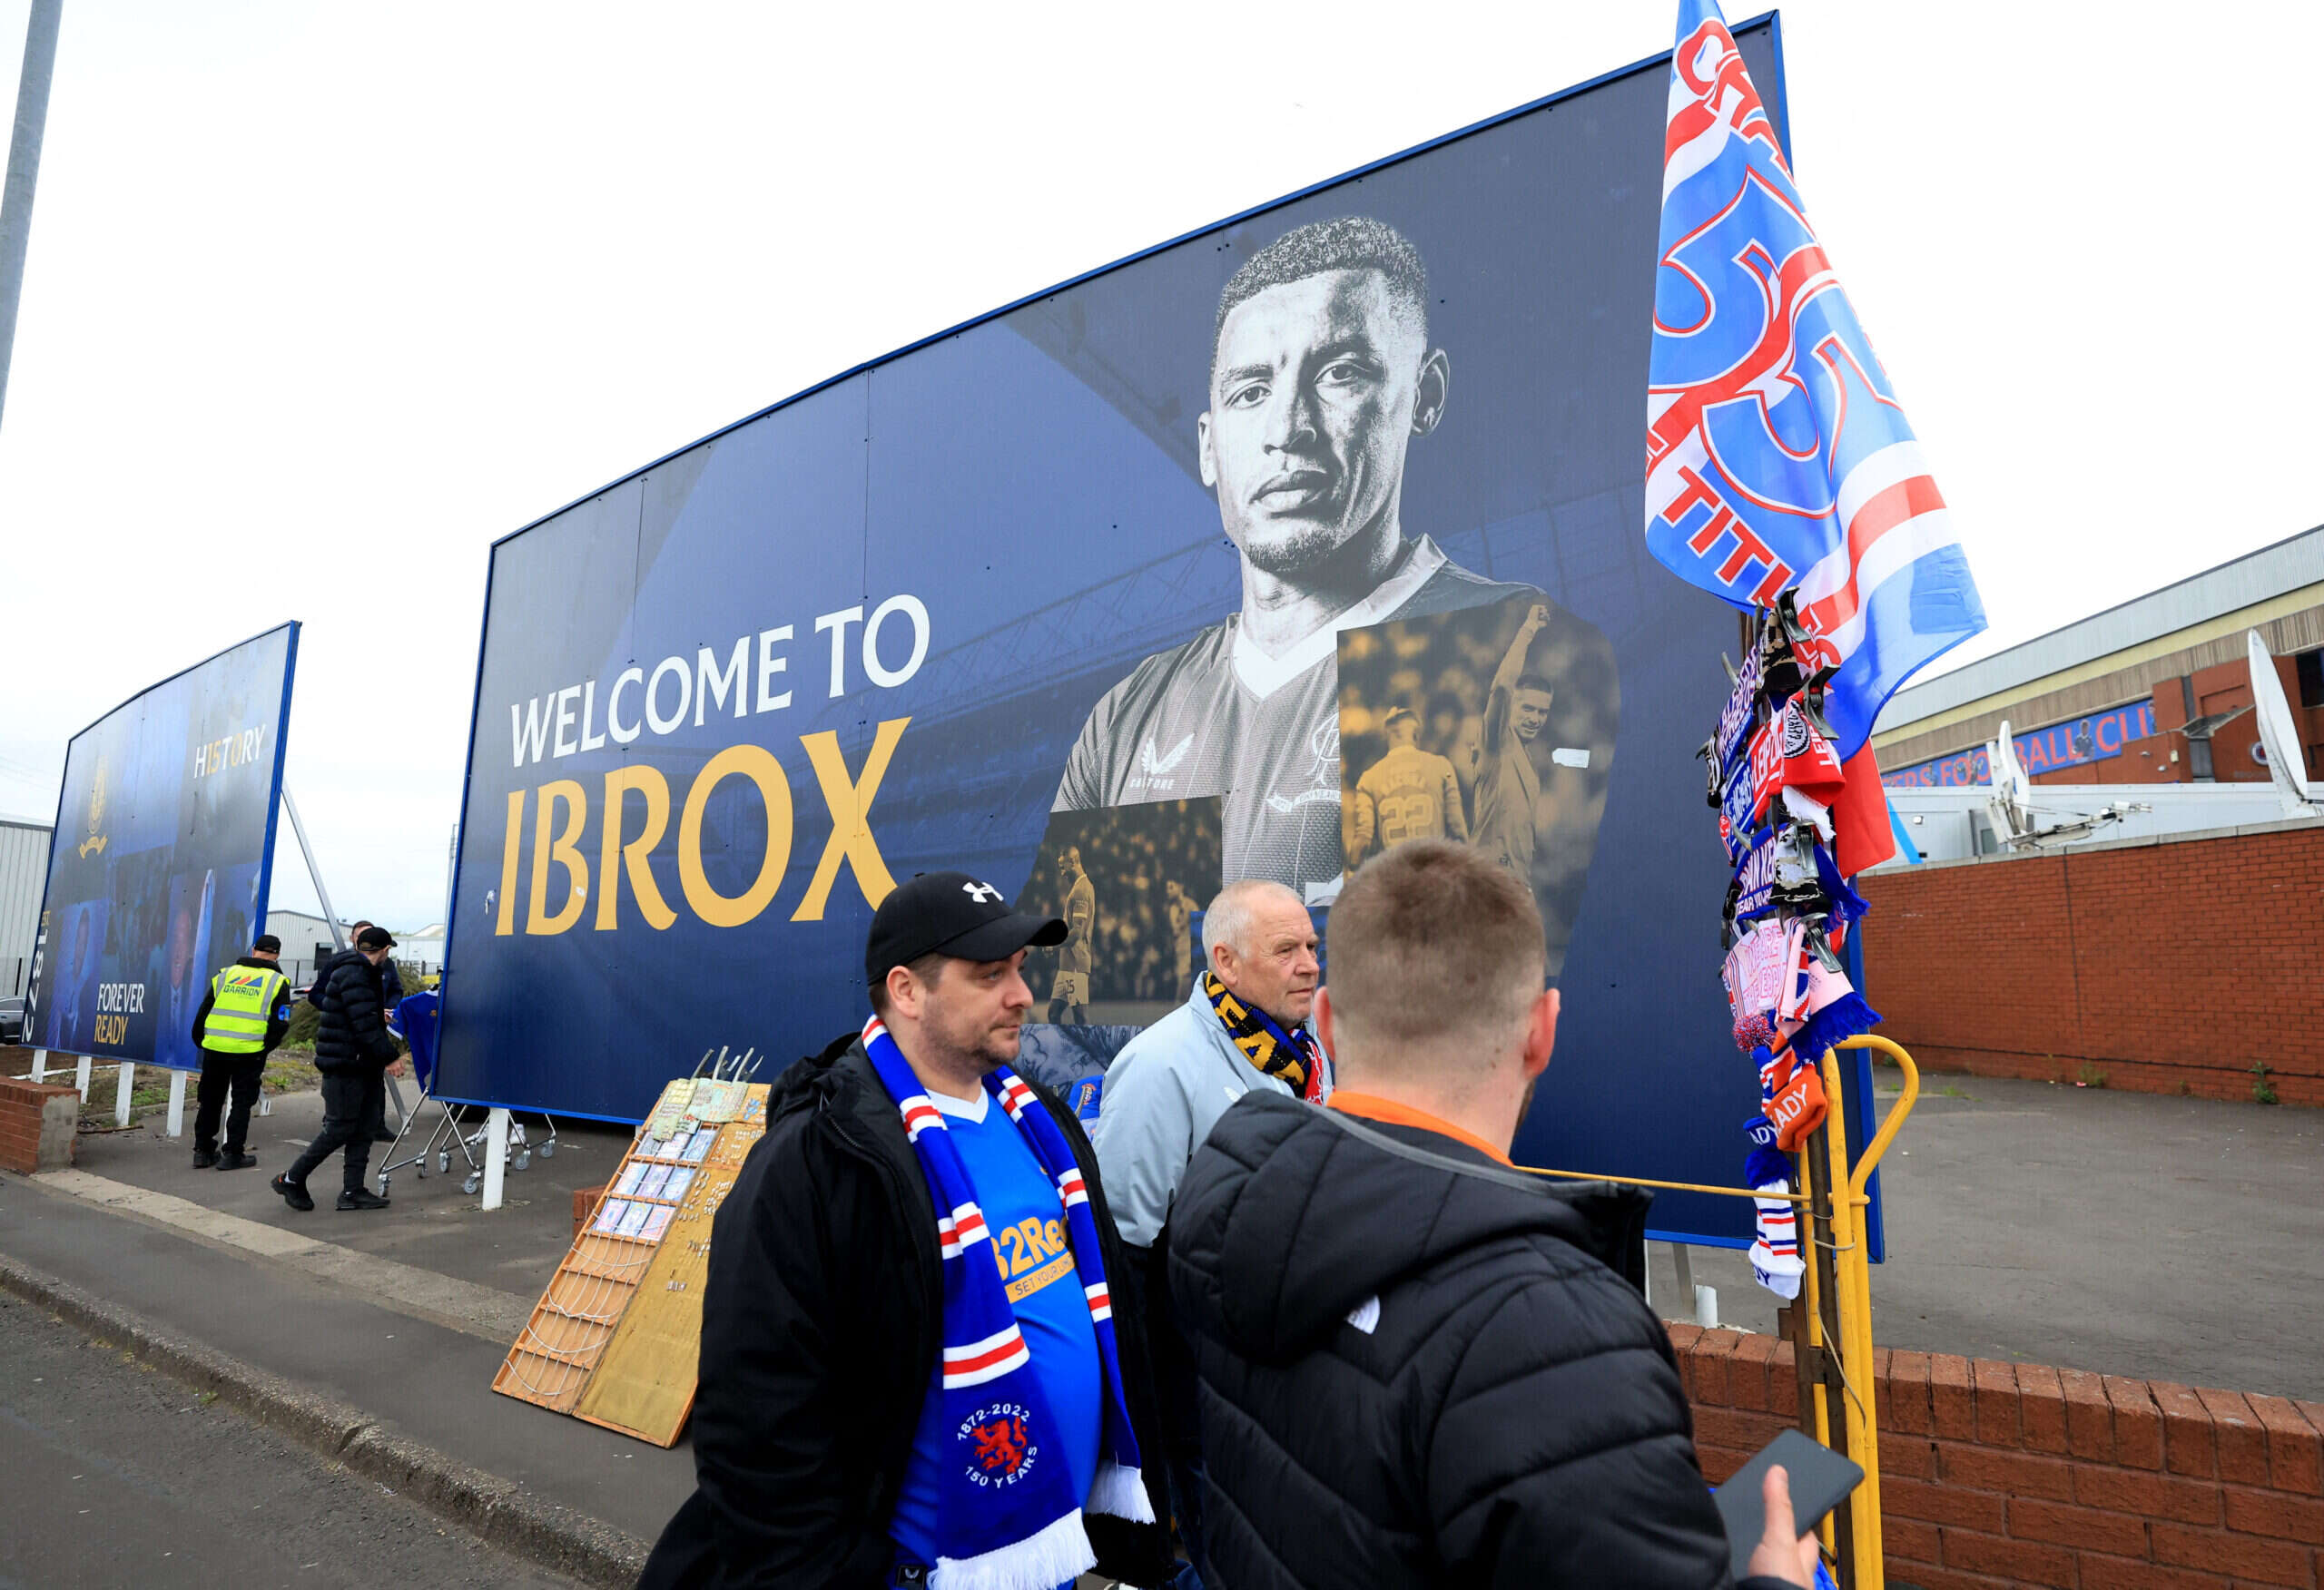 BBC coming back to Rangers FC